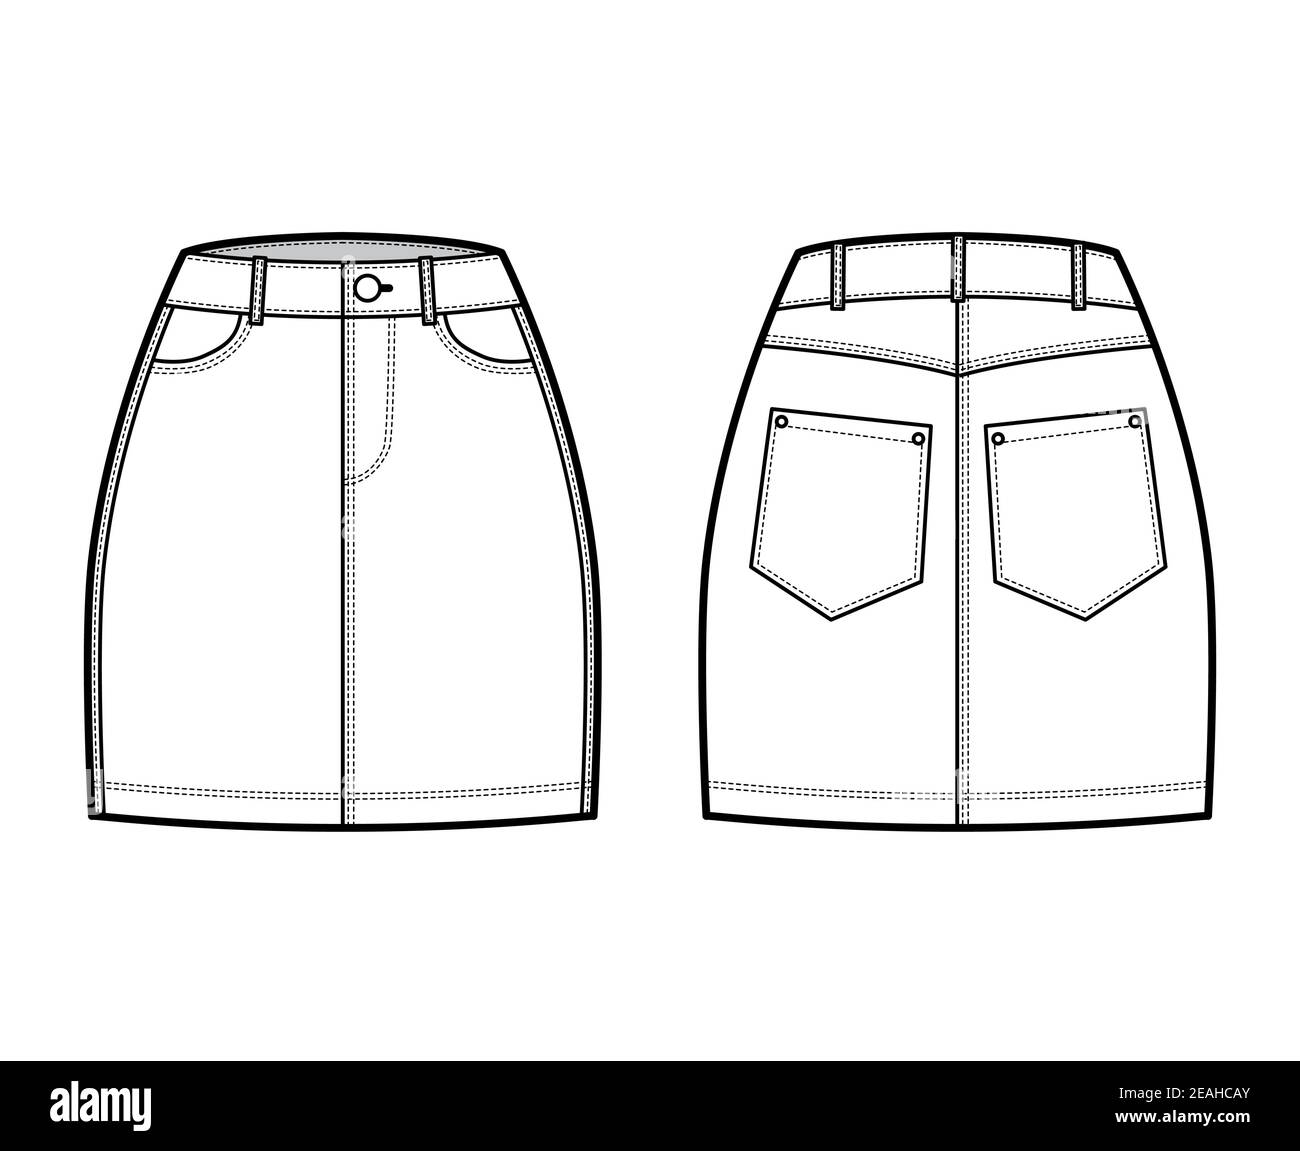 denim skirt technical fashion illustration with mini length normal waist high rise curved and angled pockets flat bottom template front back white color style women men unisex cad mockup 2EAHCAY